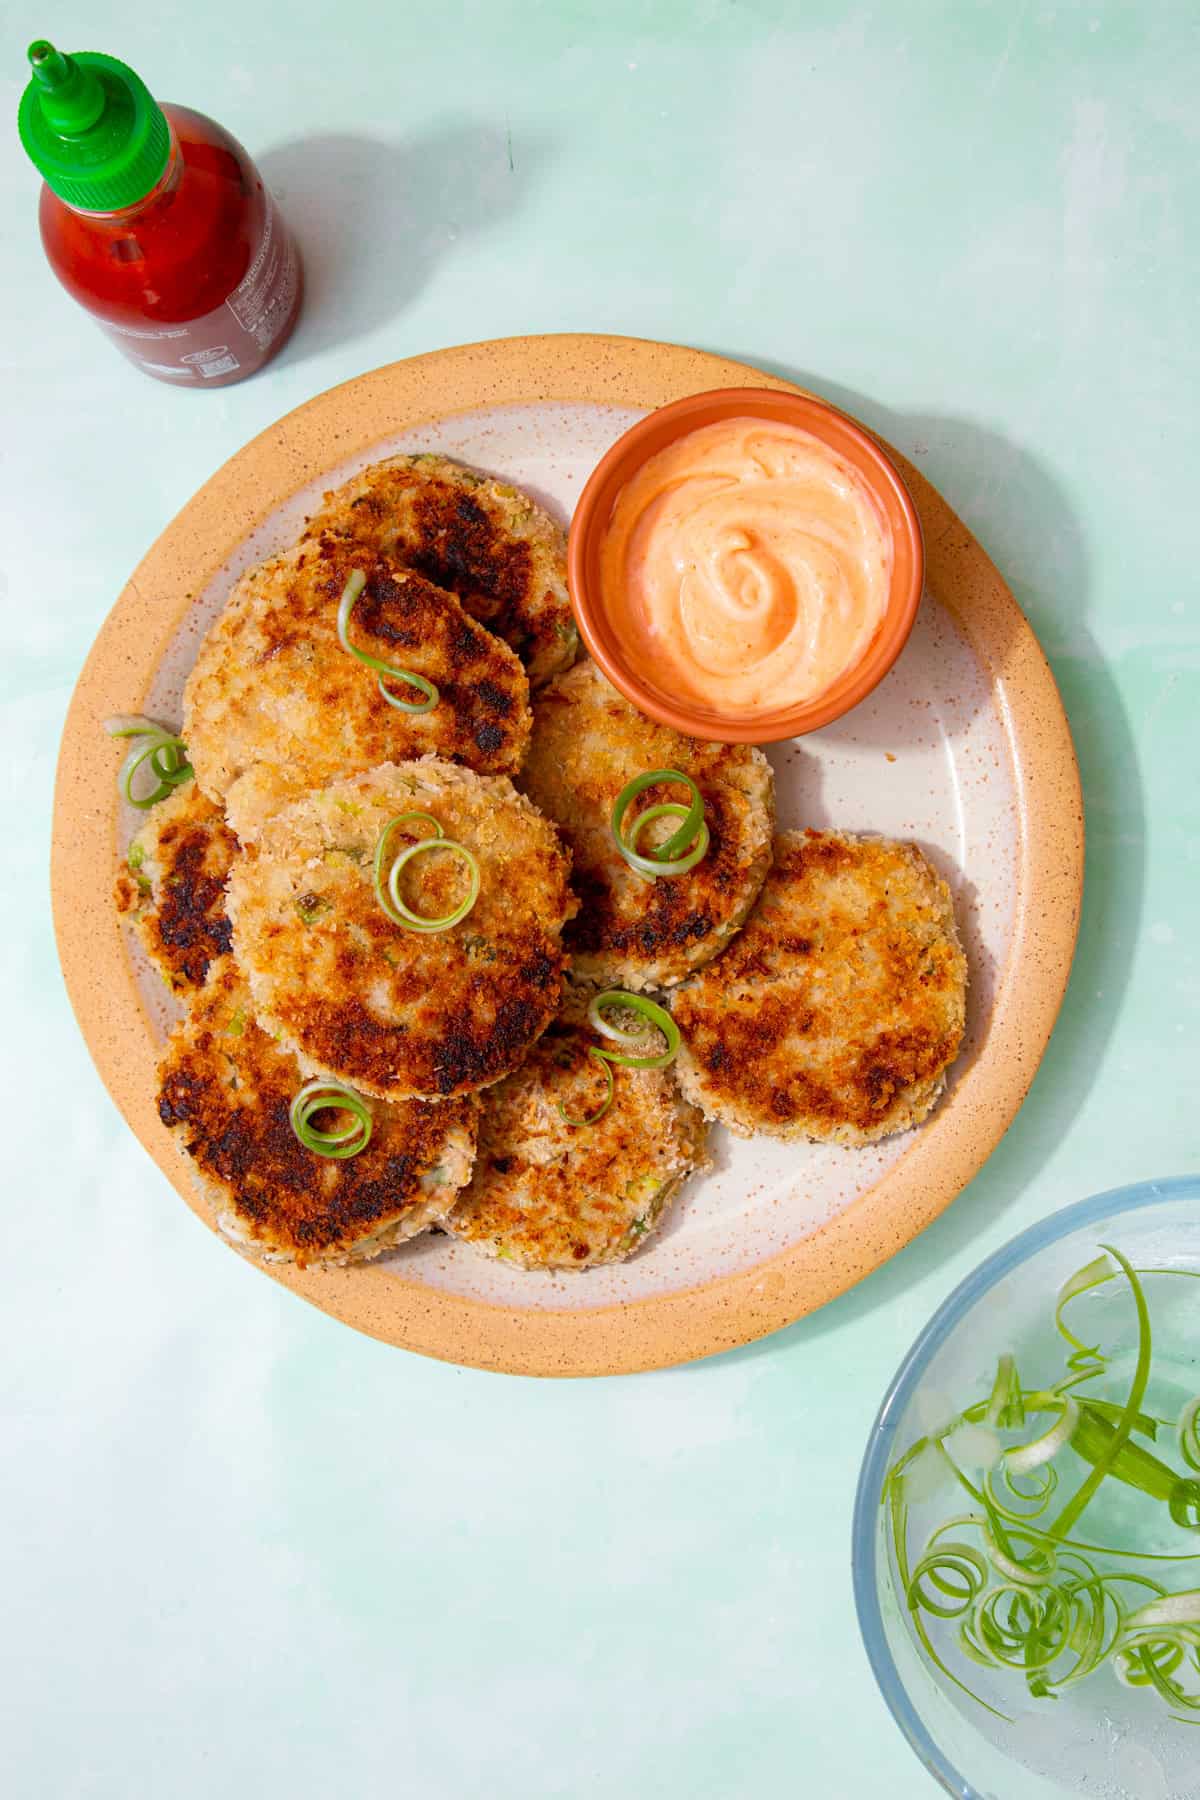 Golden browned fishcakes, piled on a plate with spirals of spring onion and a small bowl of dip and a container of sauce and a bowl with water and spirals of spring onions.